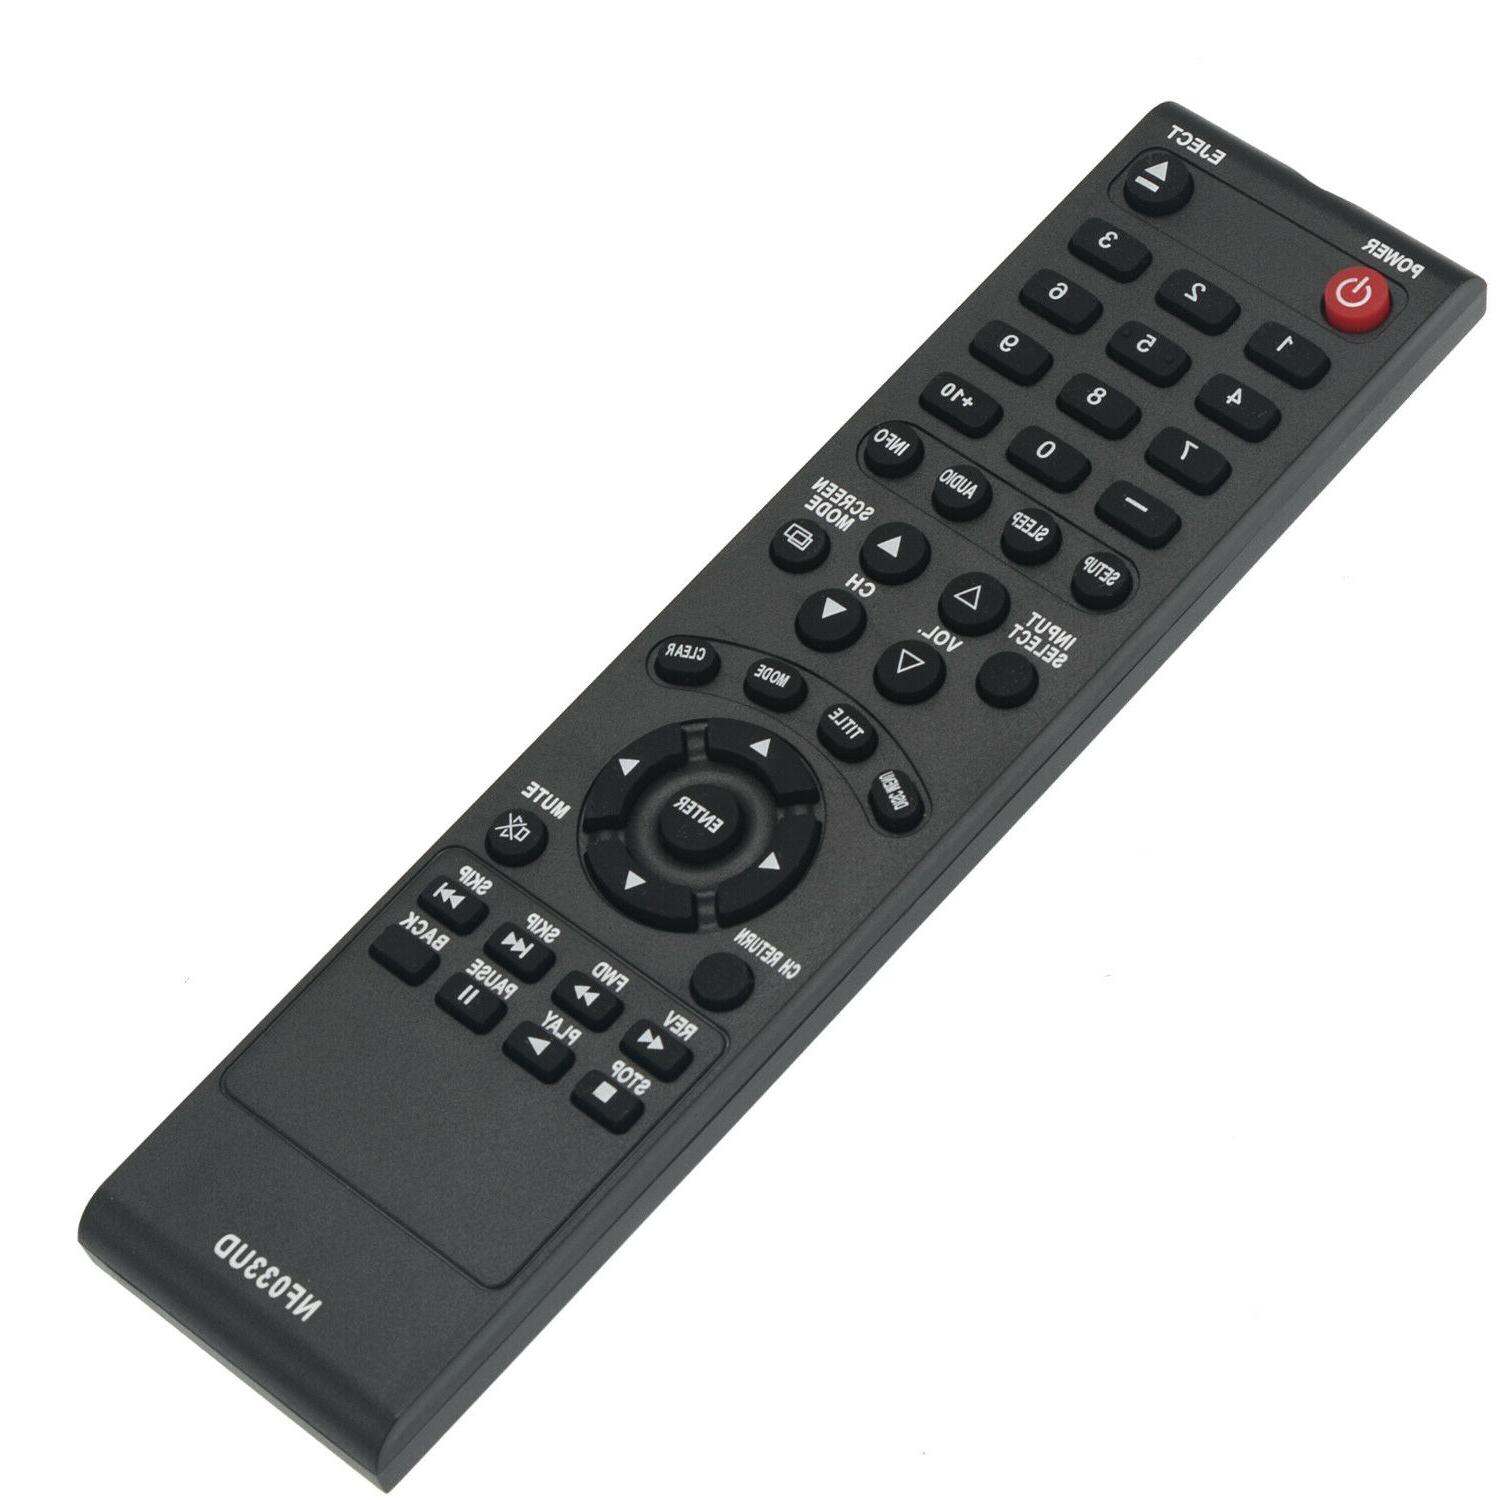 New Remote NF033UD for Emerson LED HD TV